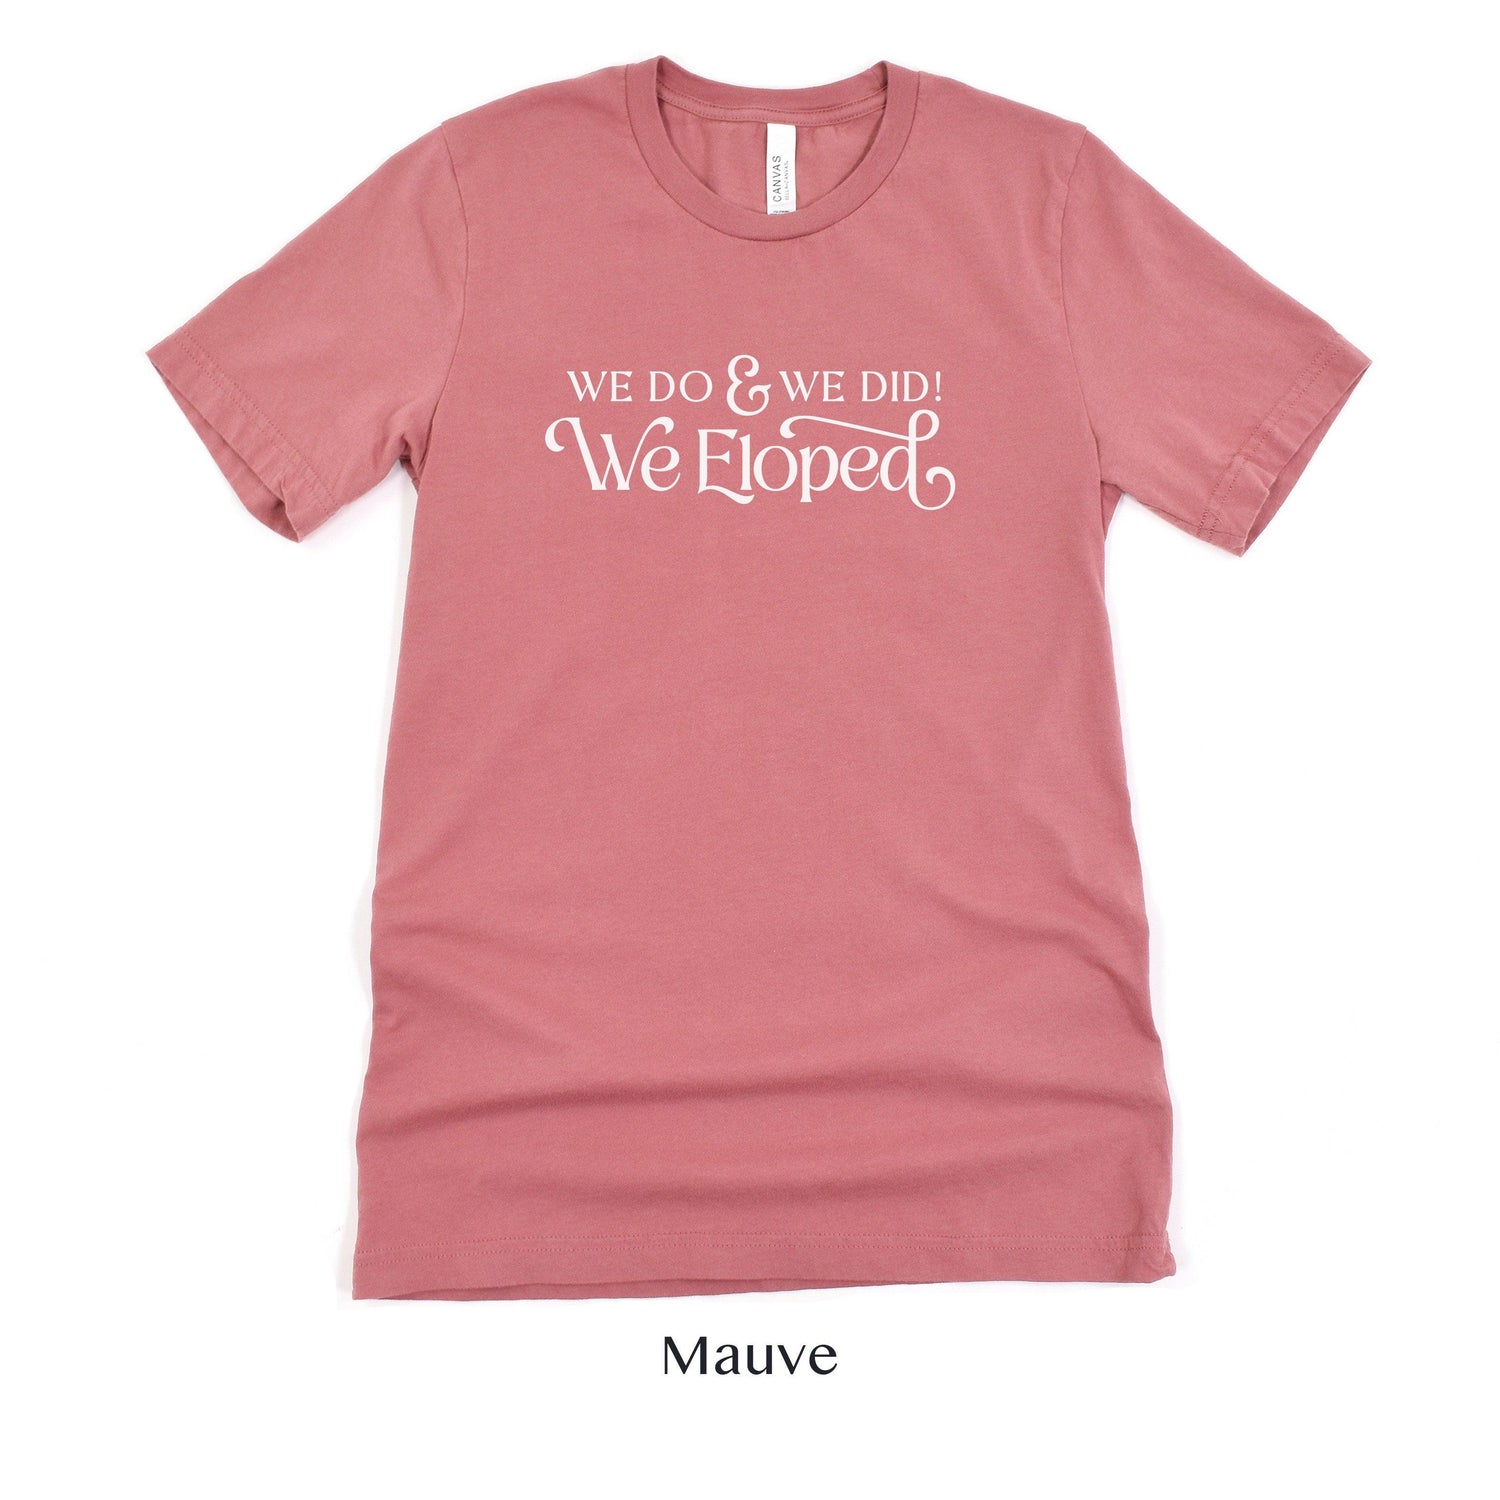 Black And White 'We Do, and We Did! We Eloped’ – Tee by Oaklynn Lane - Mauve dusty rose elopement announcement shirt